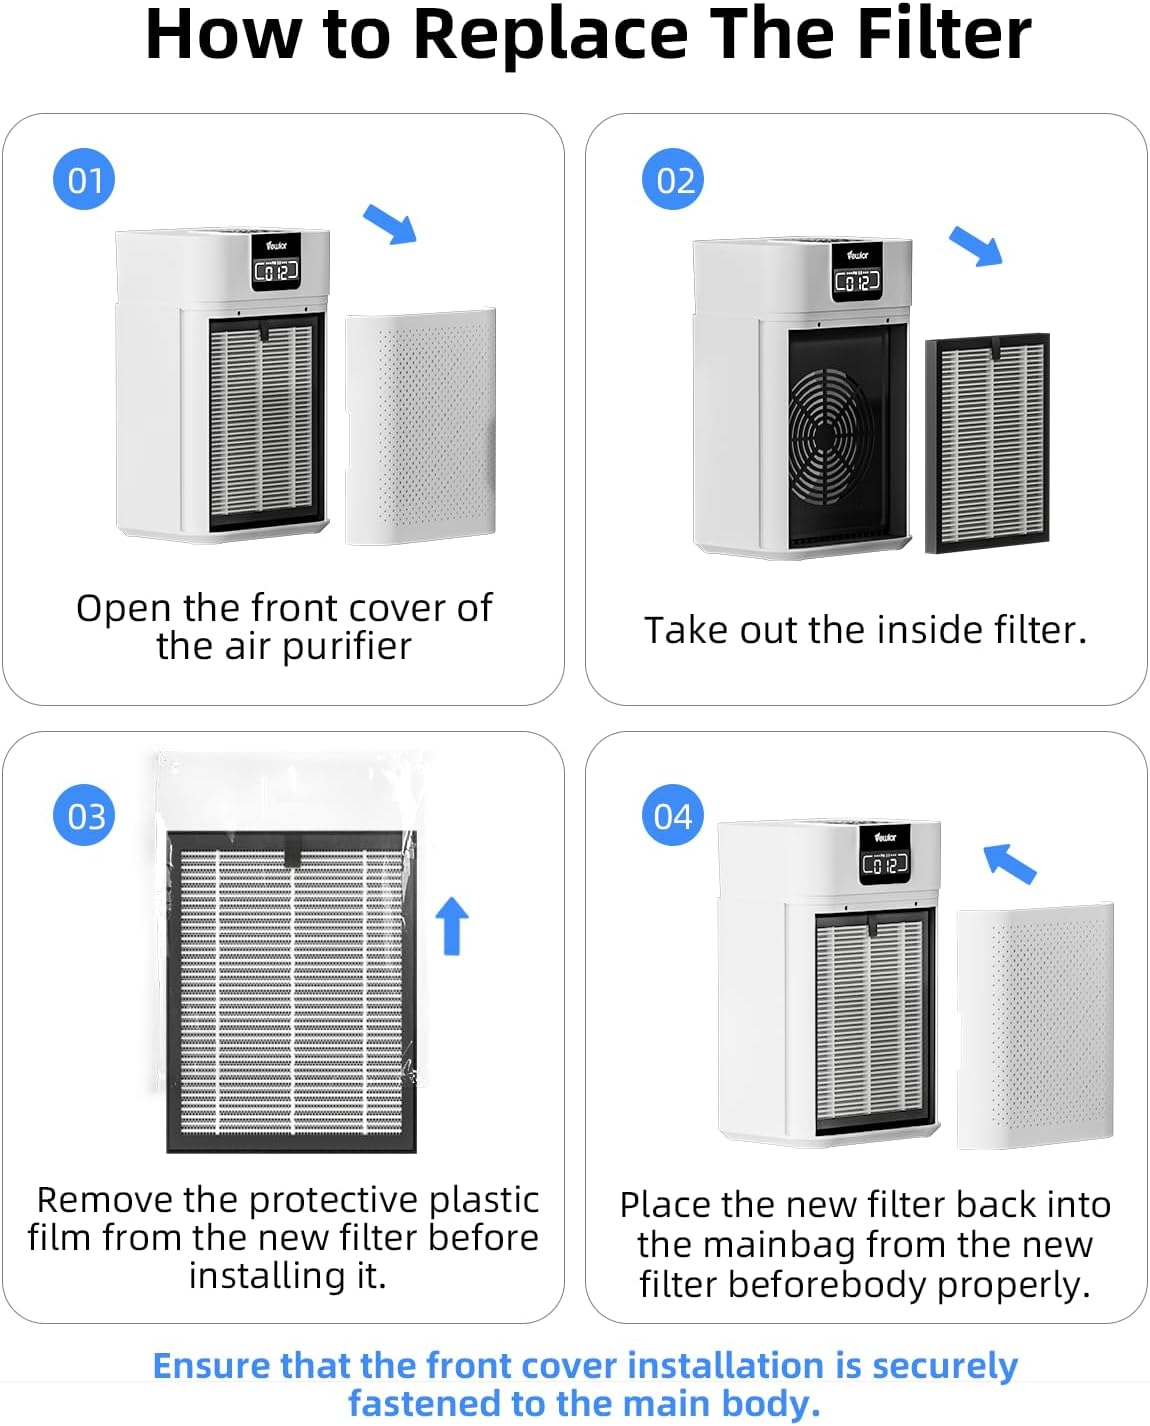 Air Purifier ClearAir-A5 Replacement Filter, VEWIOR H13 True HEPA Air Cleaner Filter (Special for ClearAir-A5 Air Purifier) Vewior